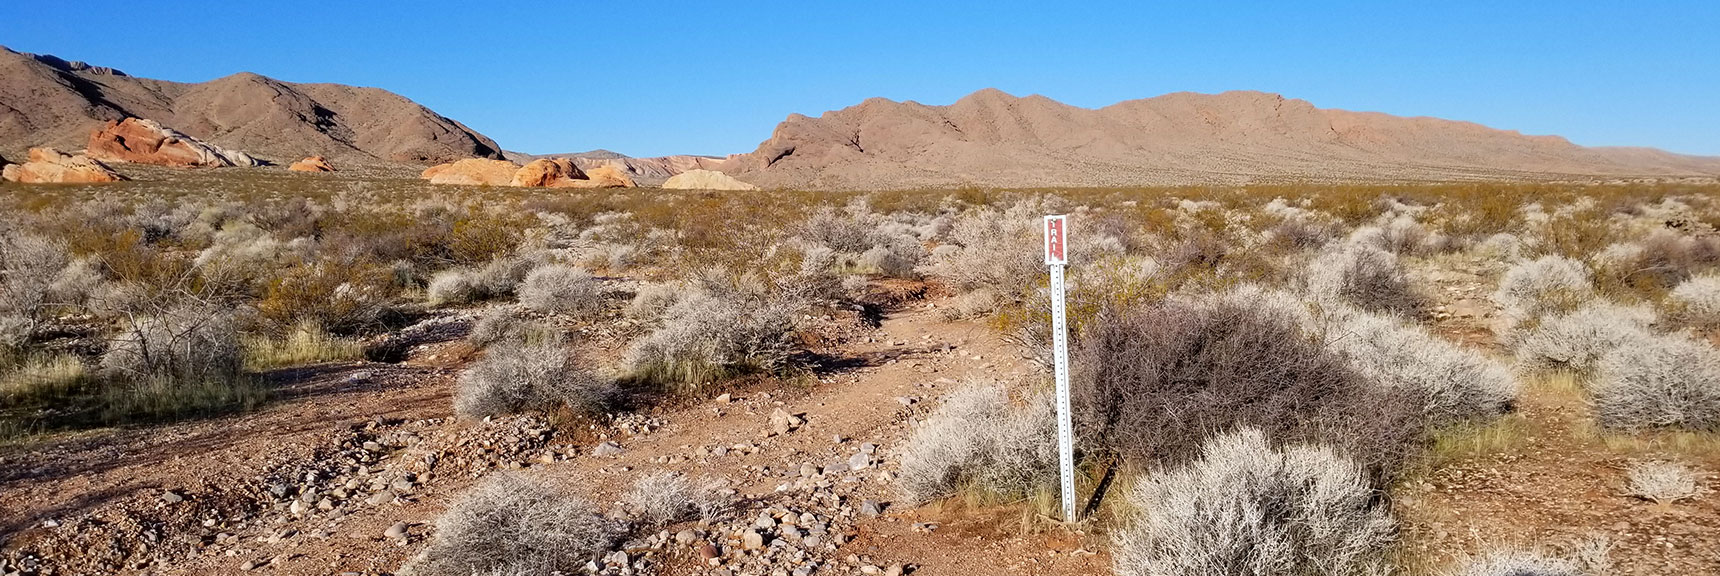 Trail Markers Lead You Through the Open Desert on Pinnacles Loop Trail in Valley of Fire State Park, Nevada